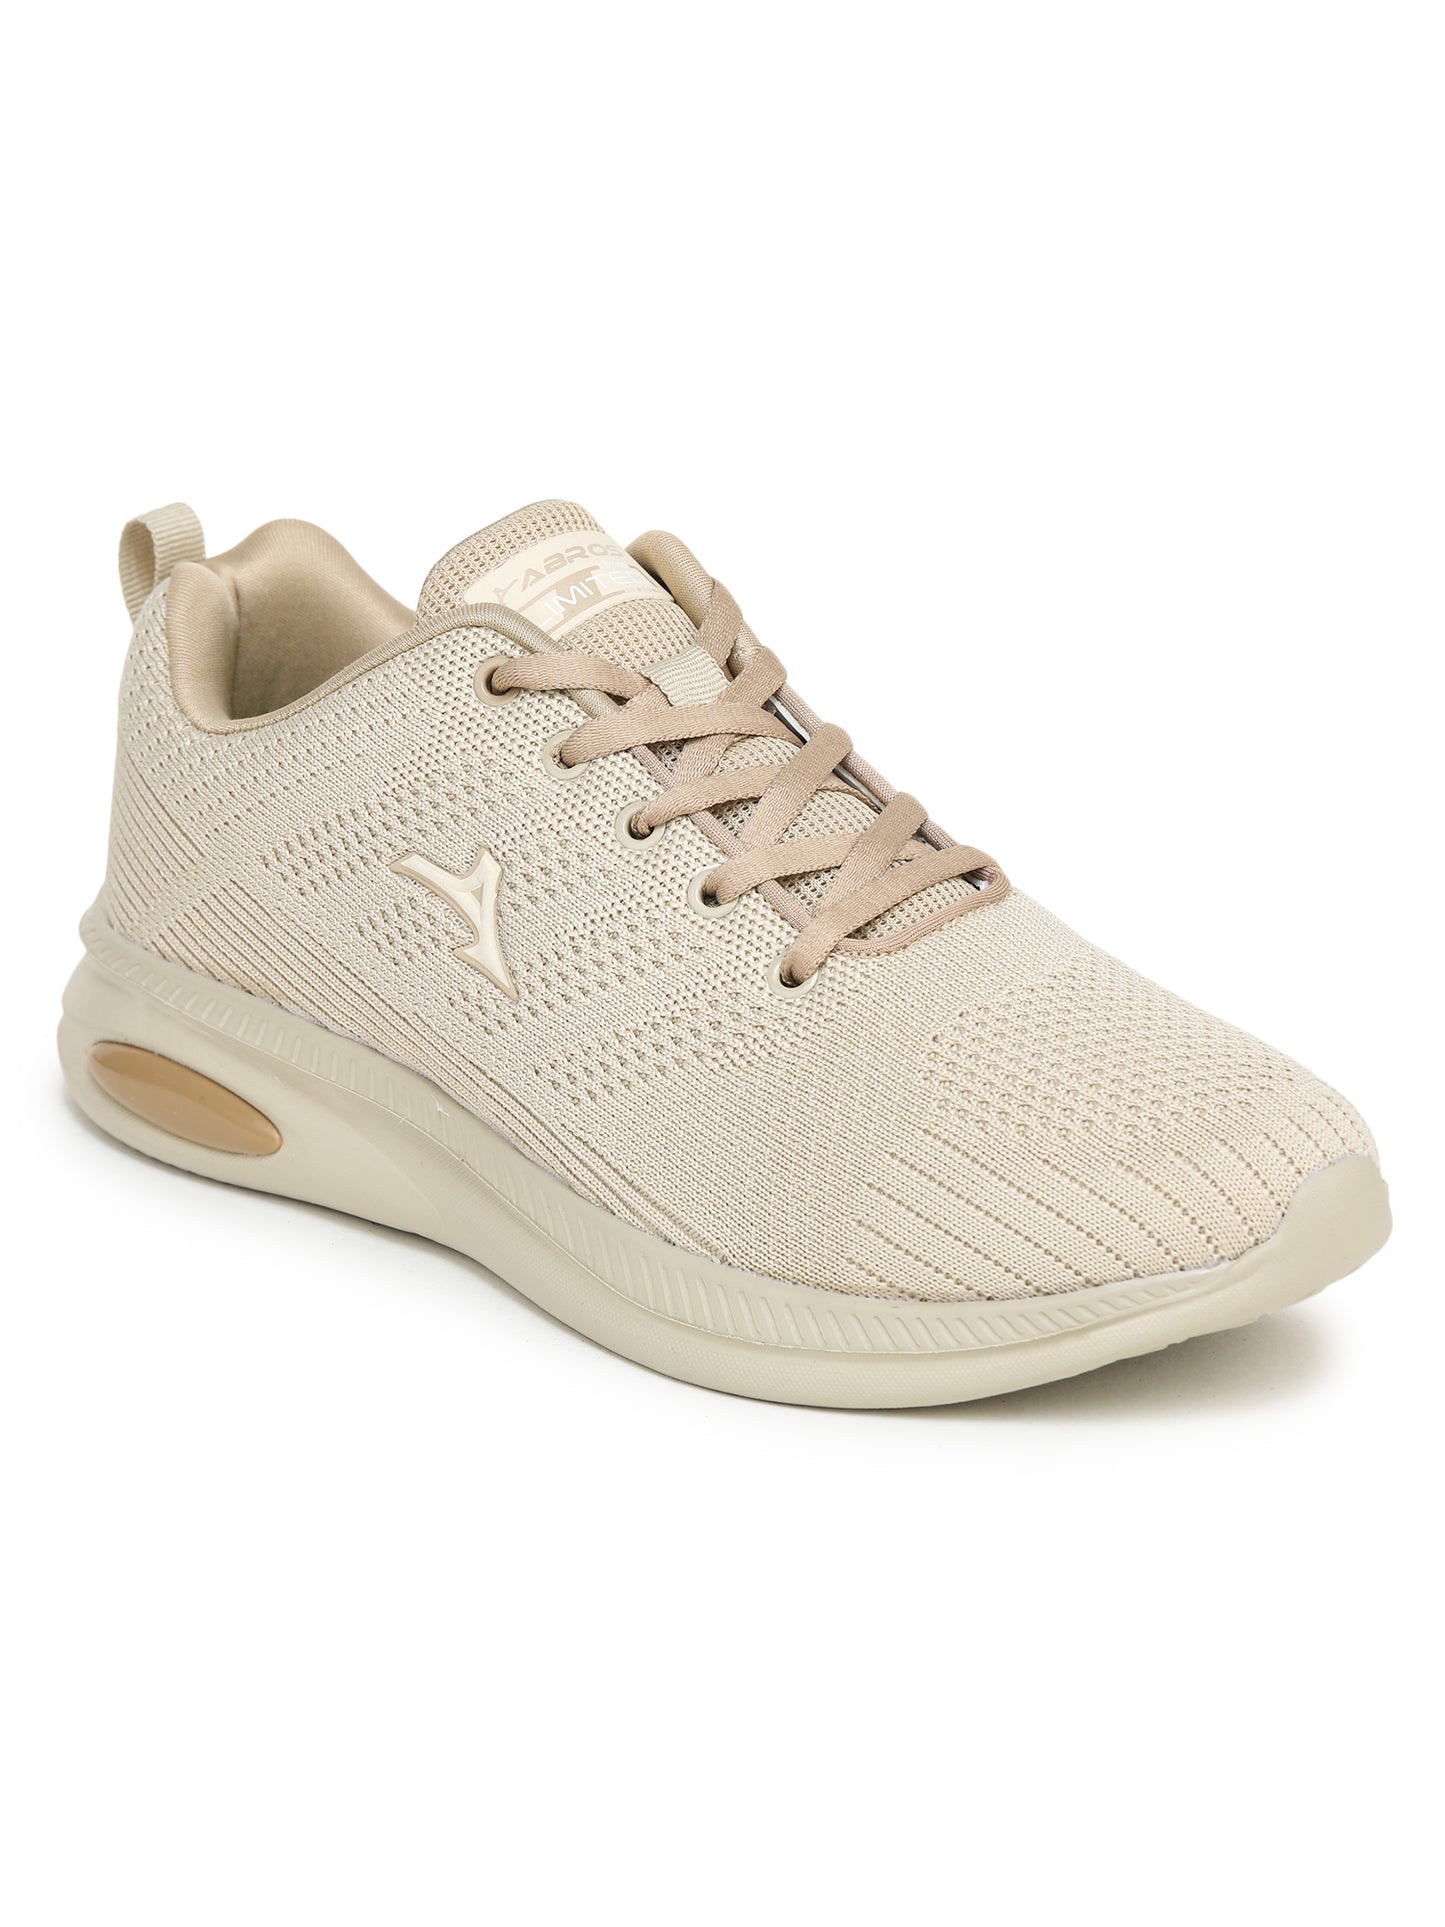 ABROS Hems Sports Shoes For Men